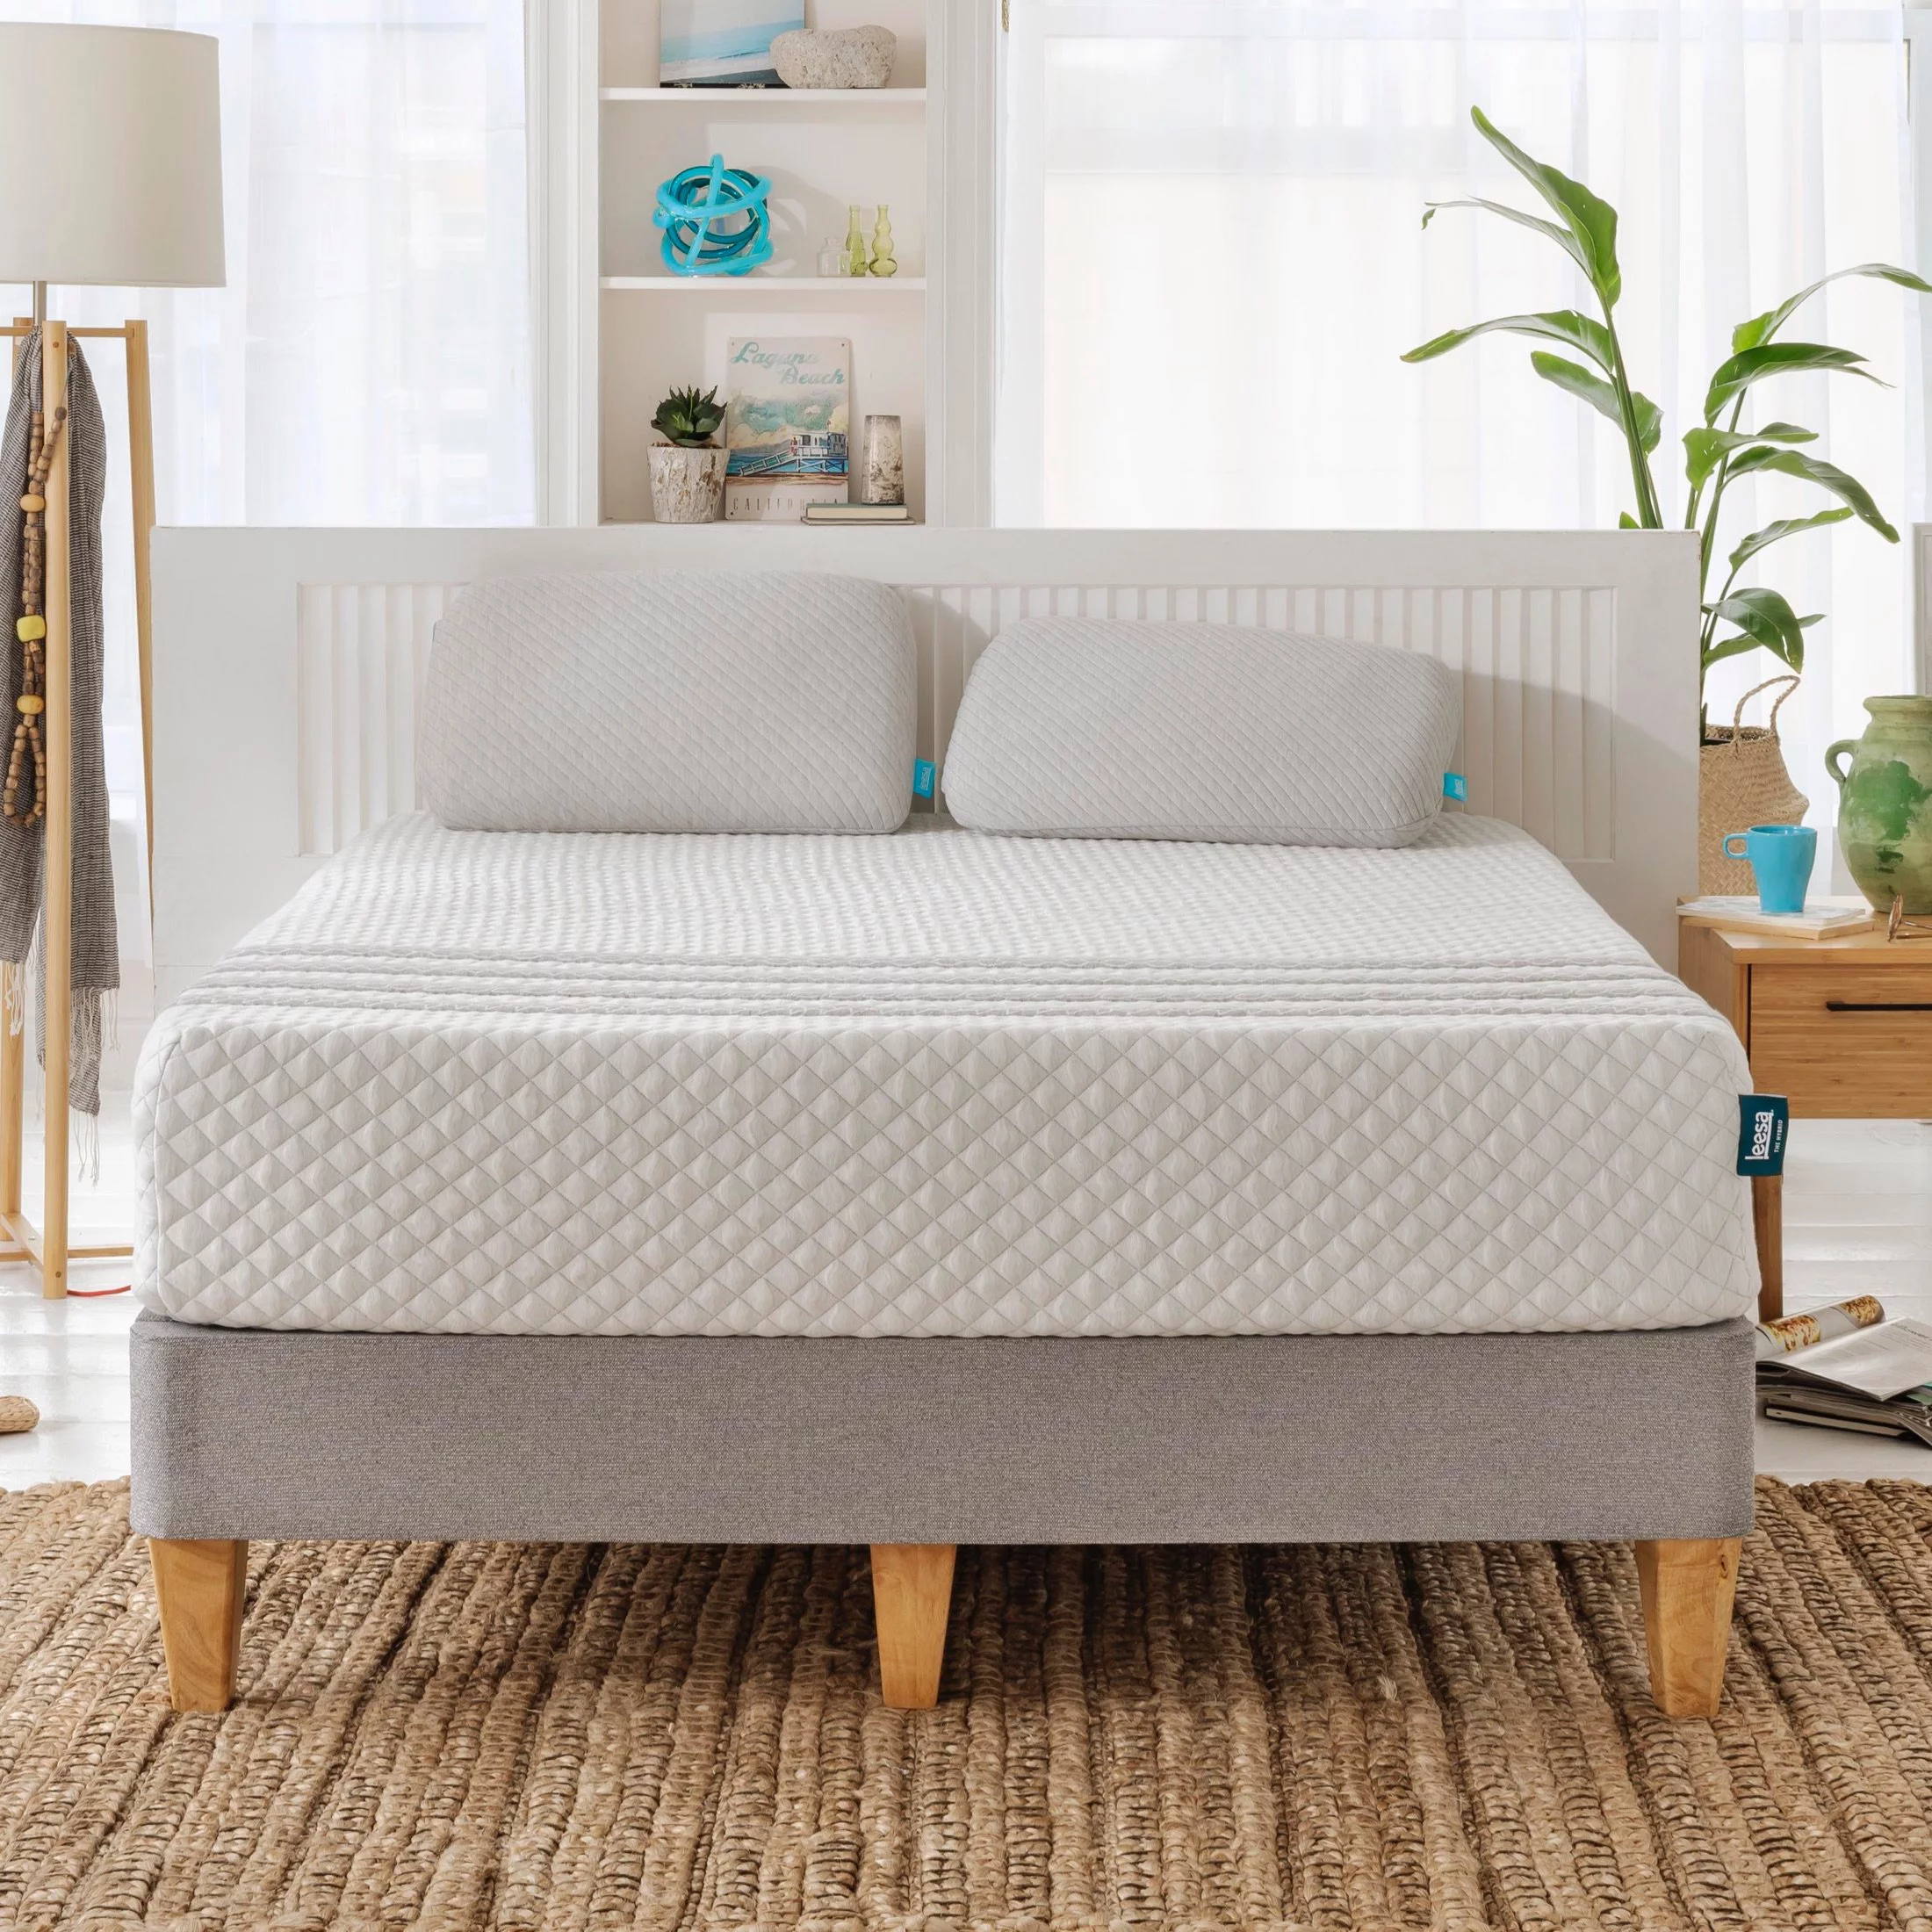 Leesa Hybrid Mattress with Memory Foam and Coils